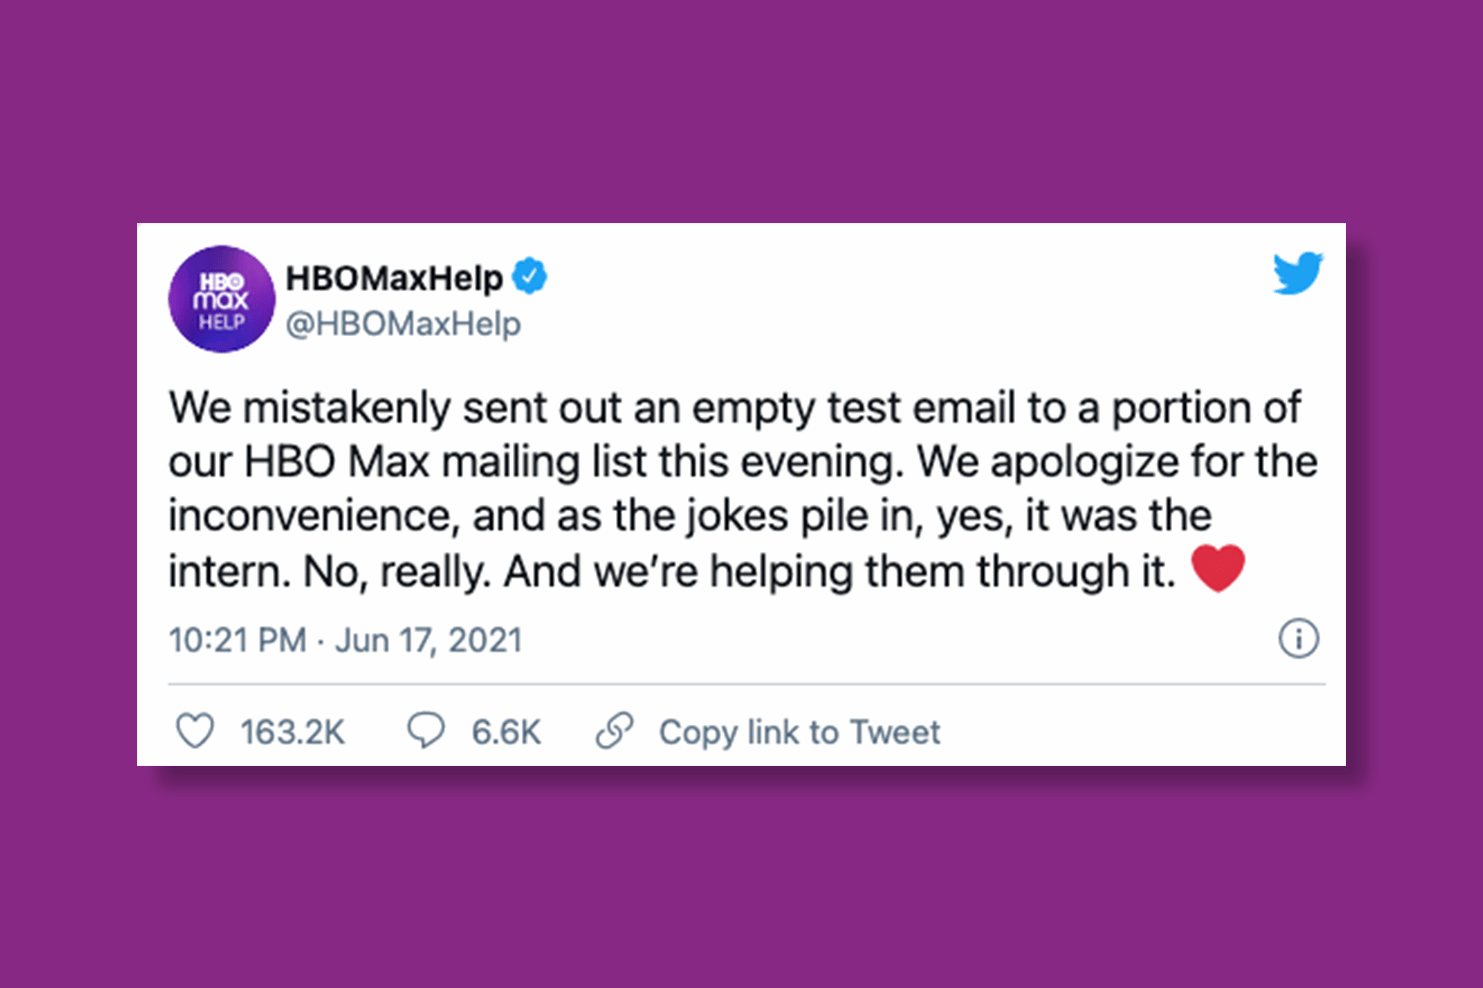 4 lessons to learn from HBO Max’s #DearIntern campaign.